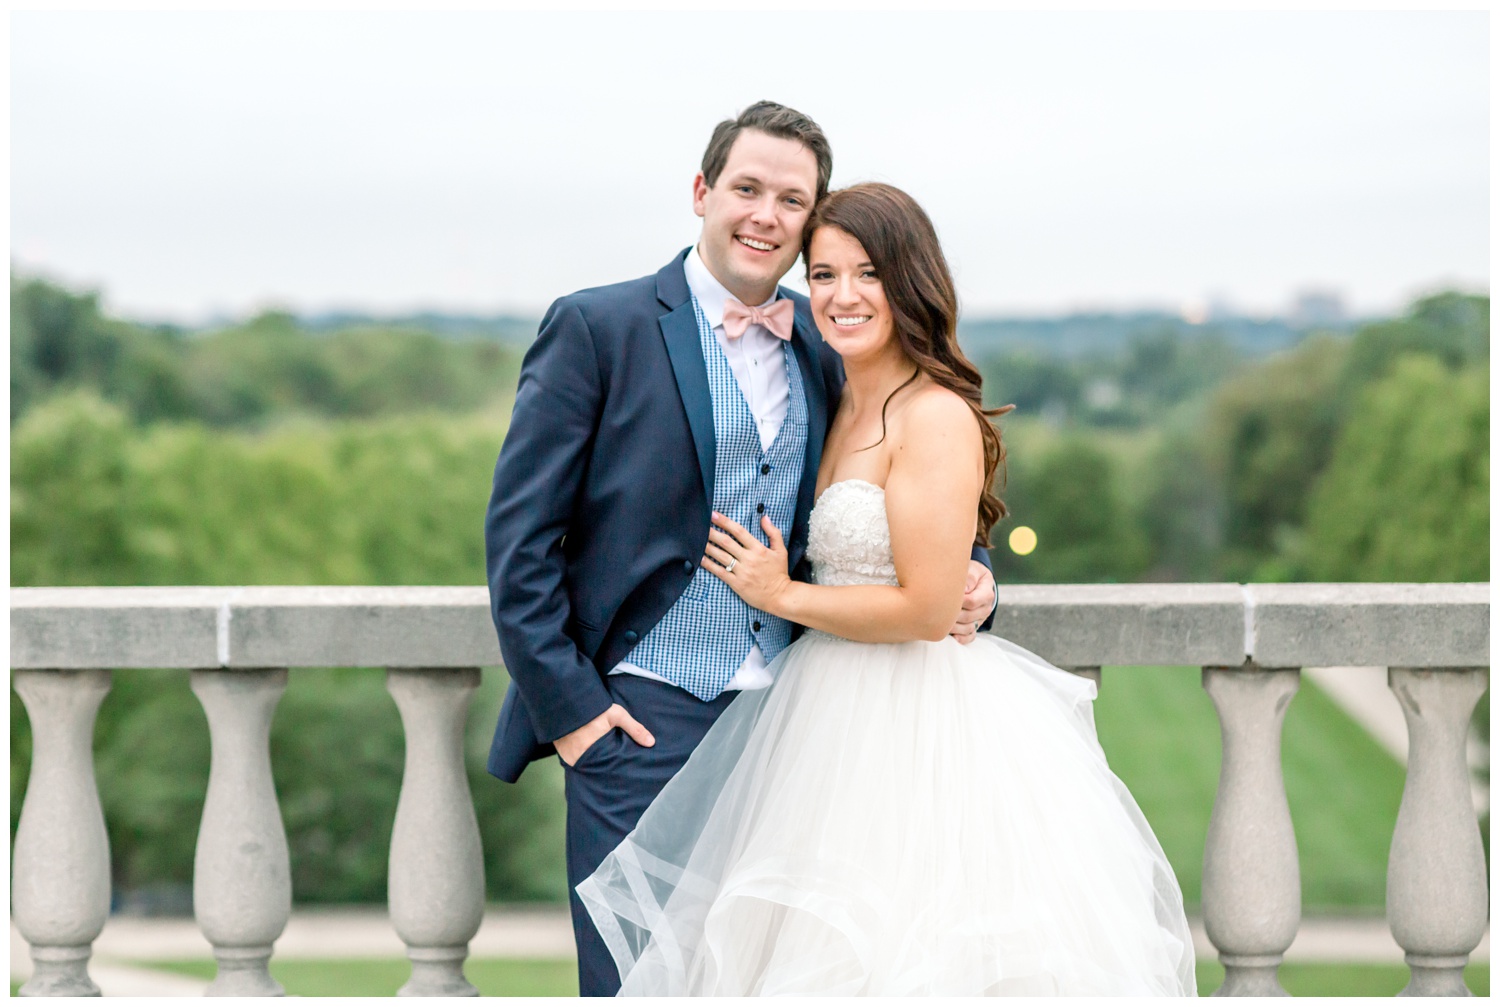 Just Married Bride and Groom at Ault Park Pavilion